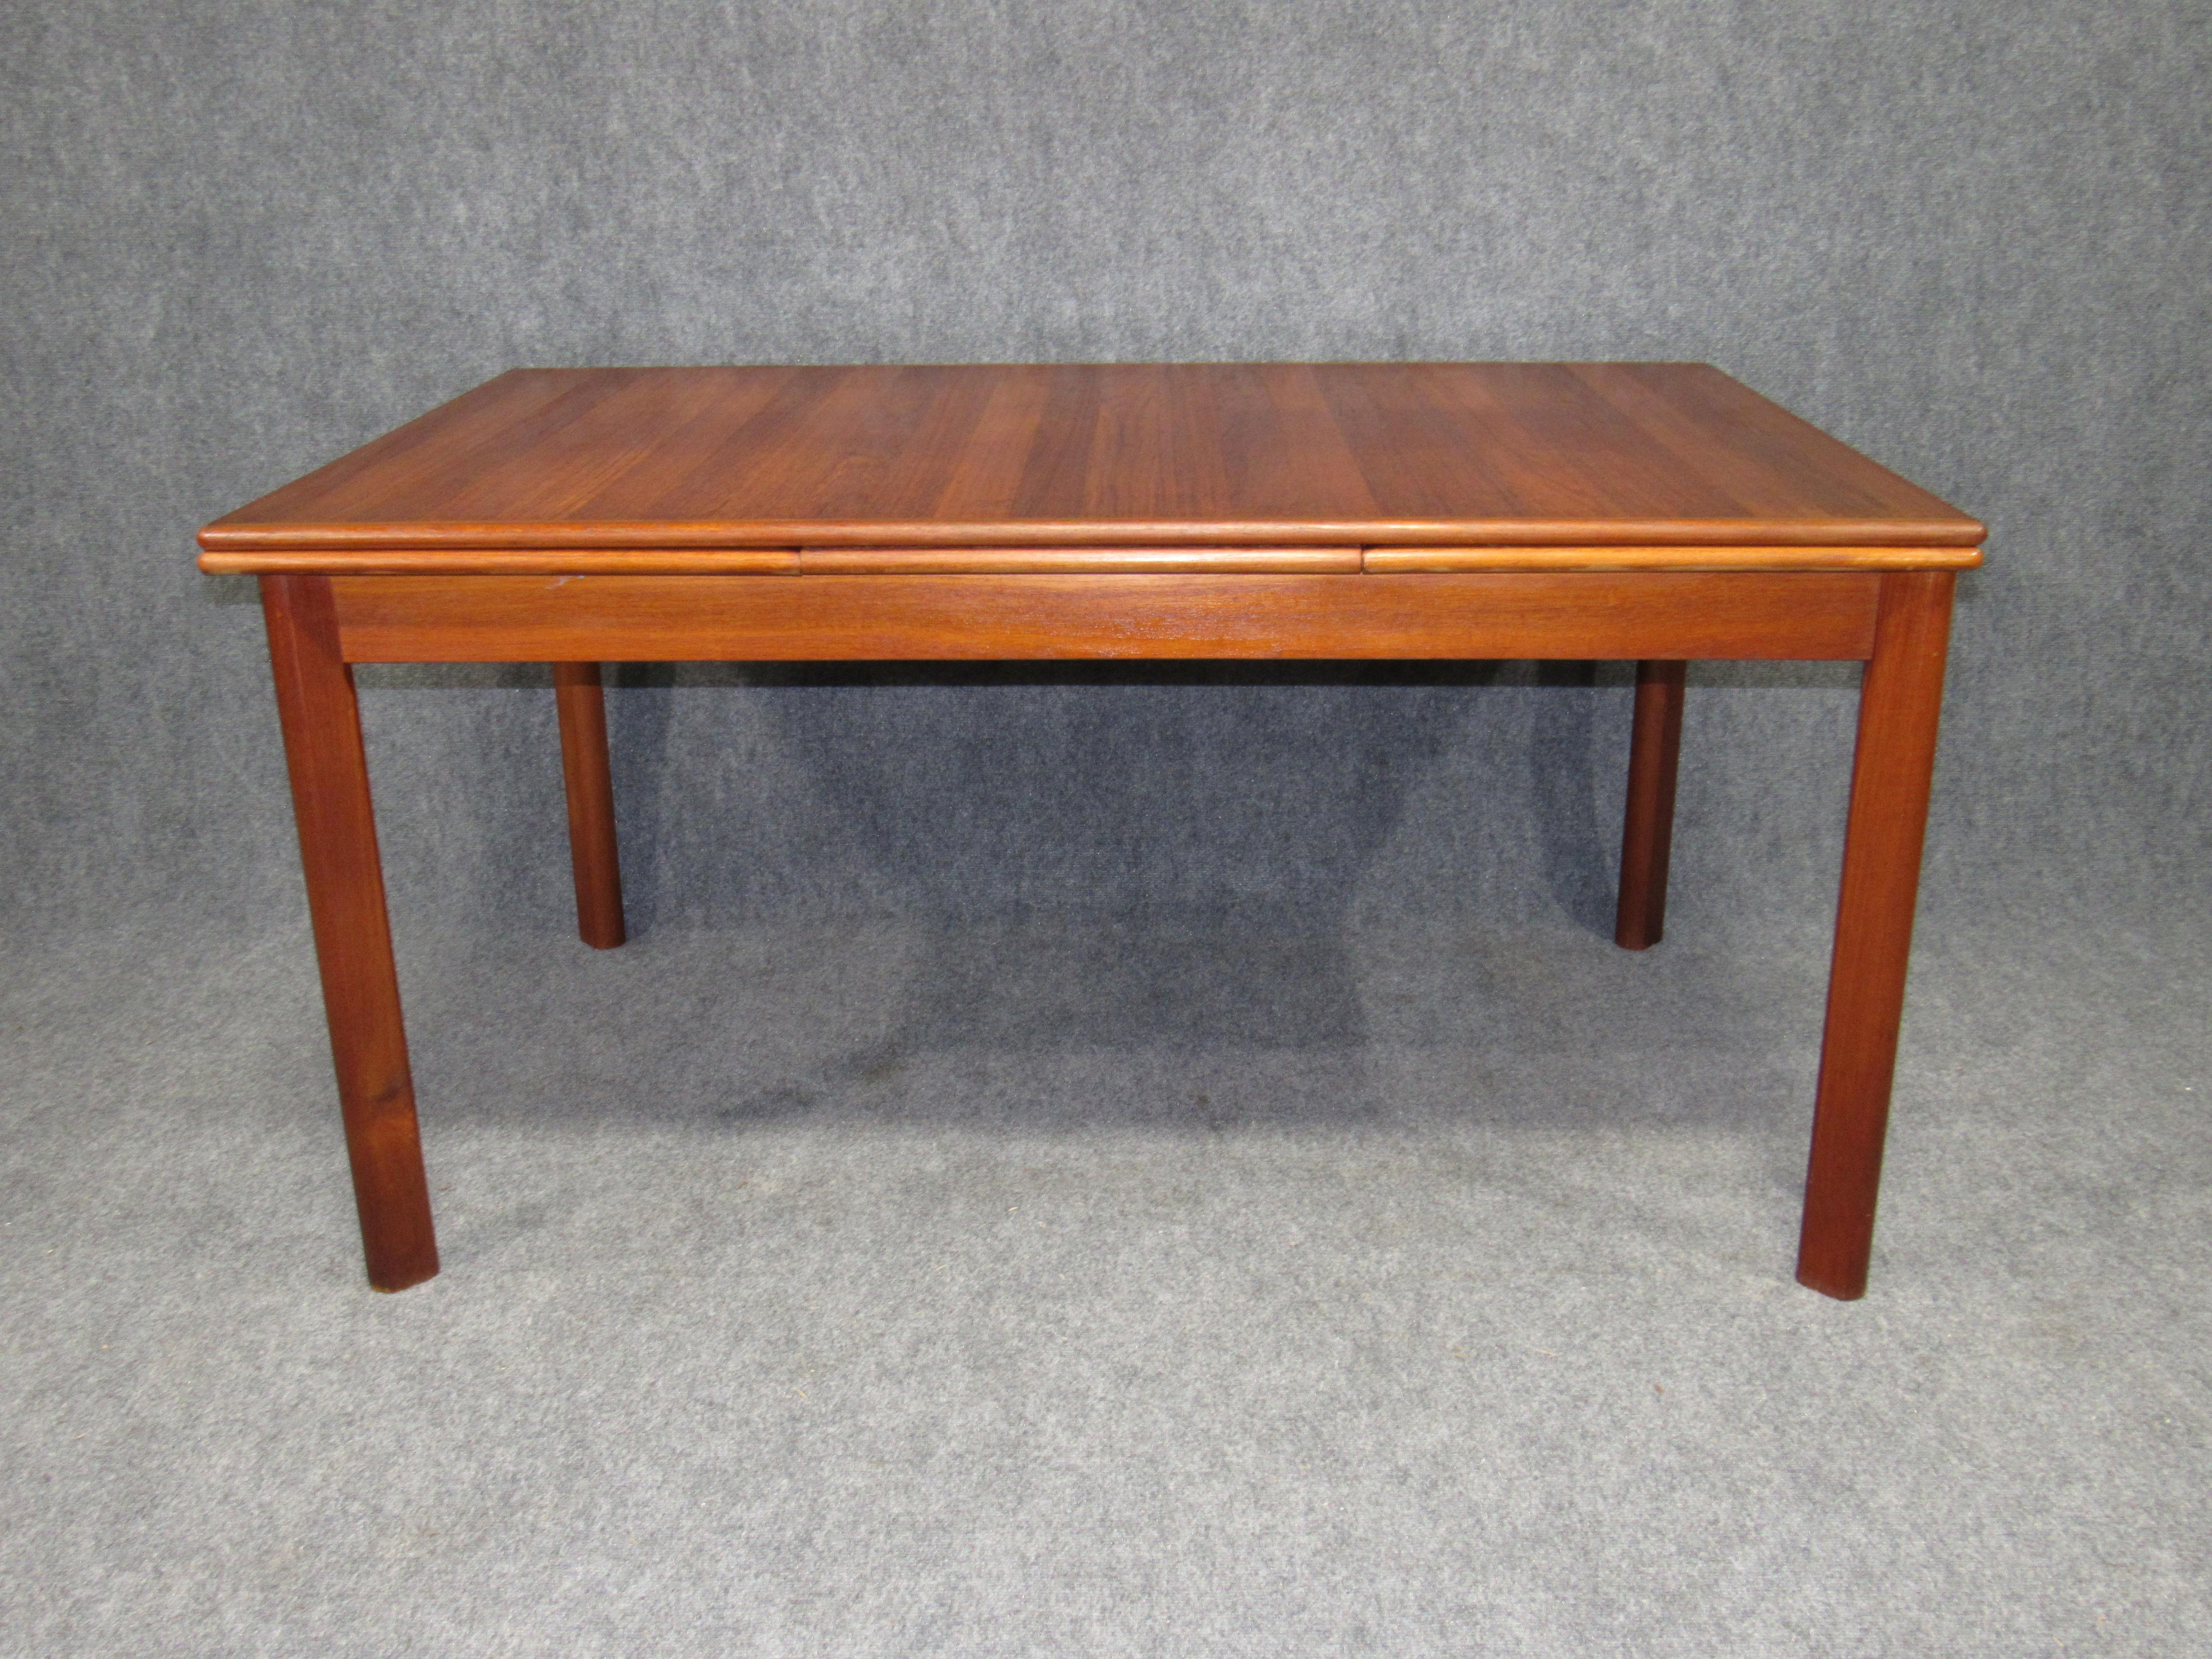 Danish modern teak dining table with pullout / pull-out leaves.